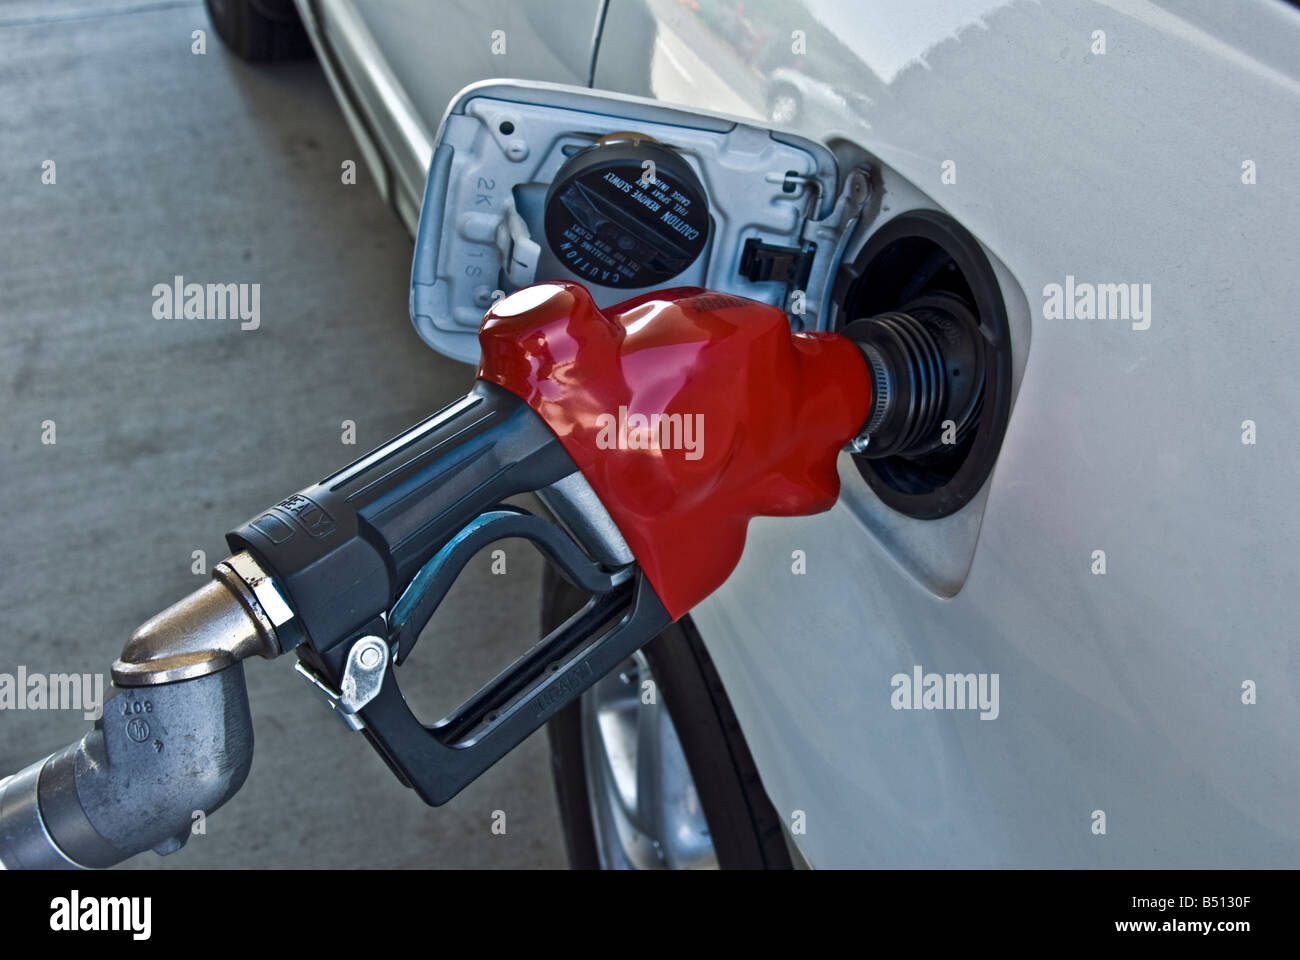 Gas pump nozzle anti-spill device for use with conventional fuel delivery pumps to eliminate spillage and loss of fuel Stock Photo